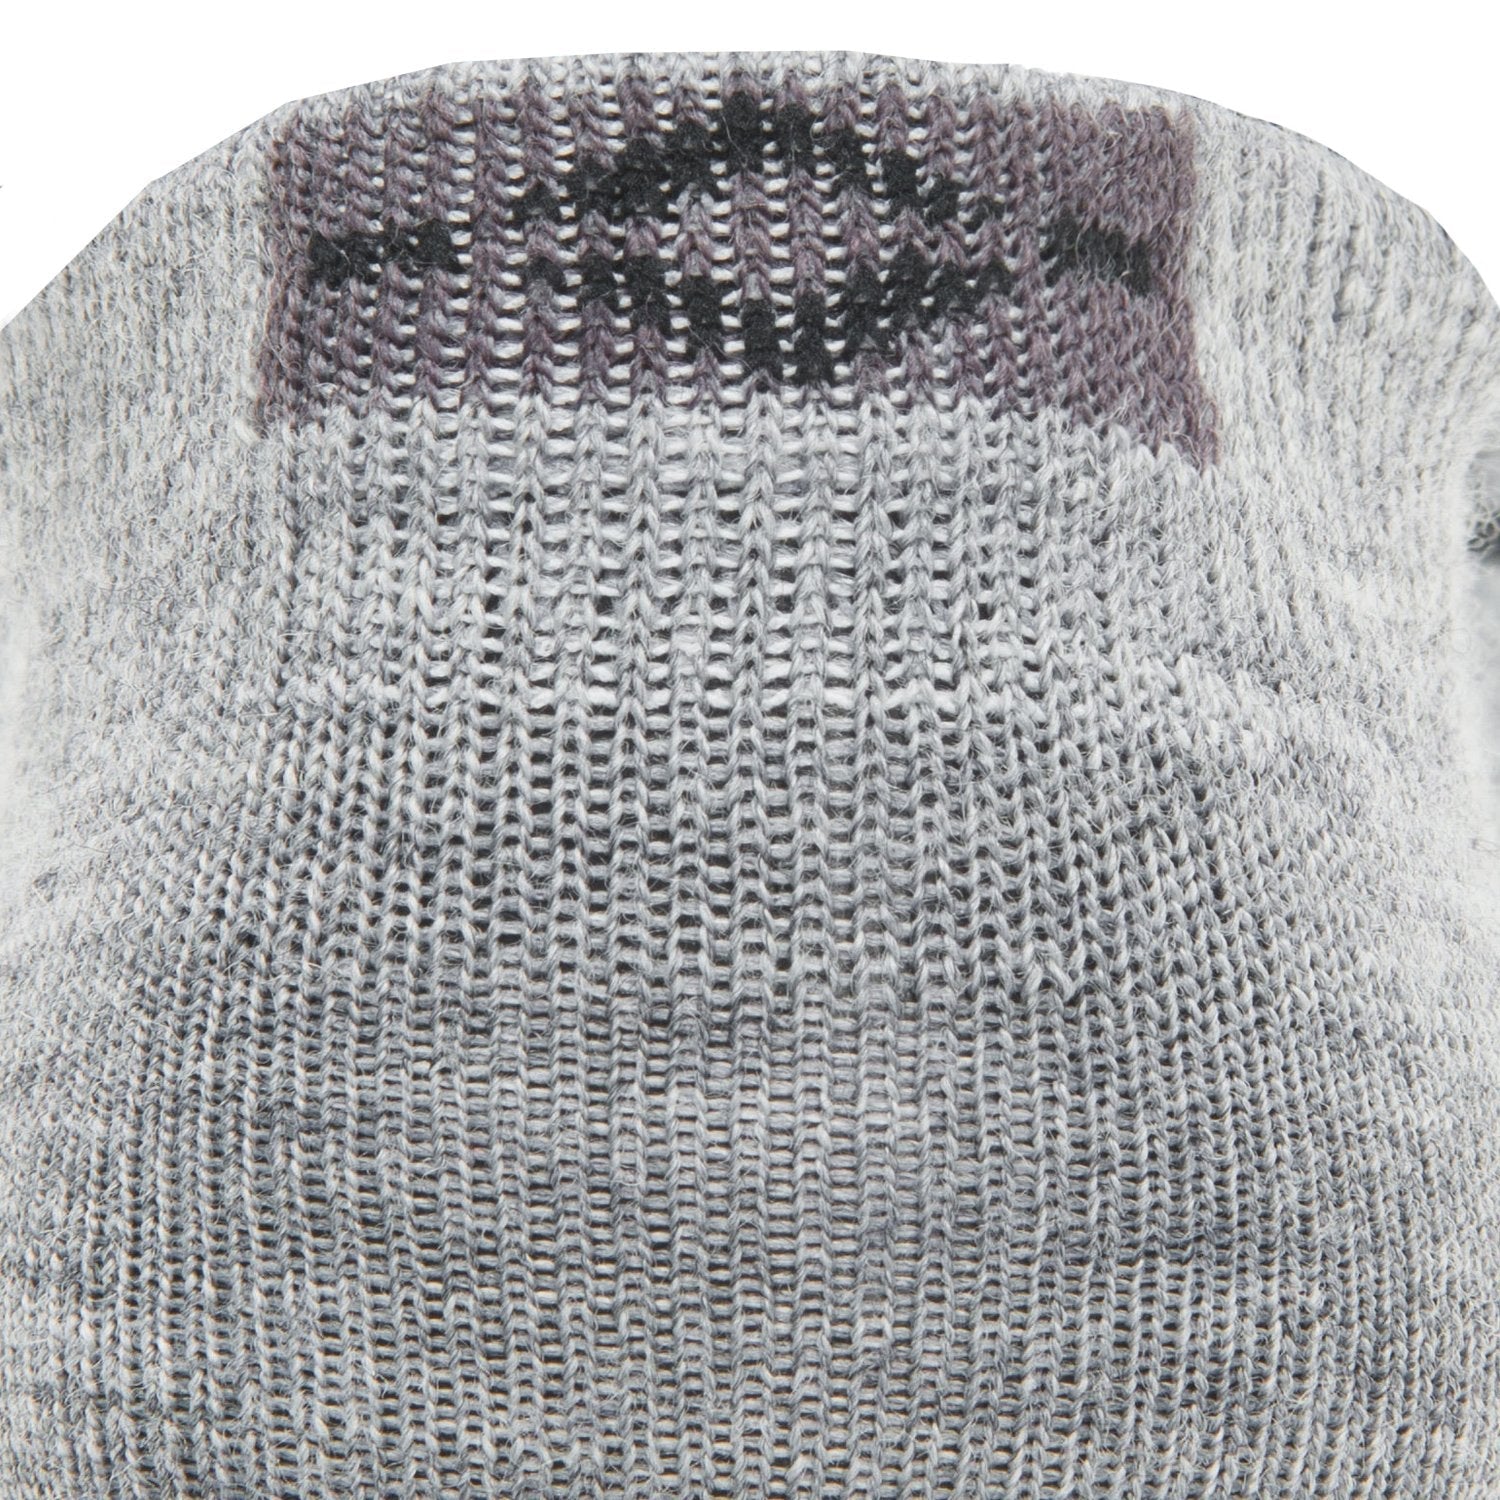 Axiom No Show Sock With Merino Wool - Grey cuff perspective - made in The USA Wigwam Socks